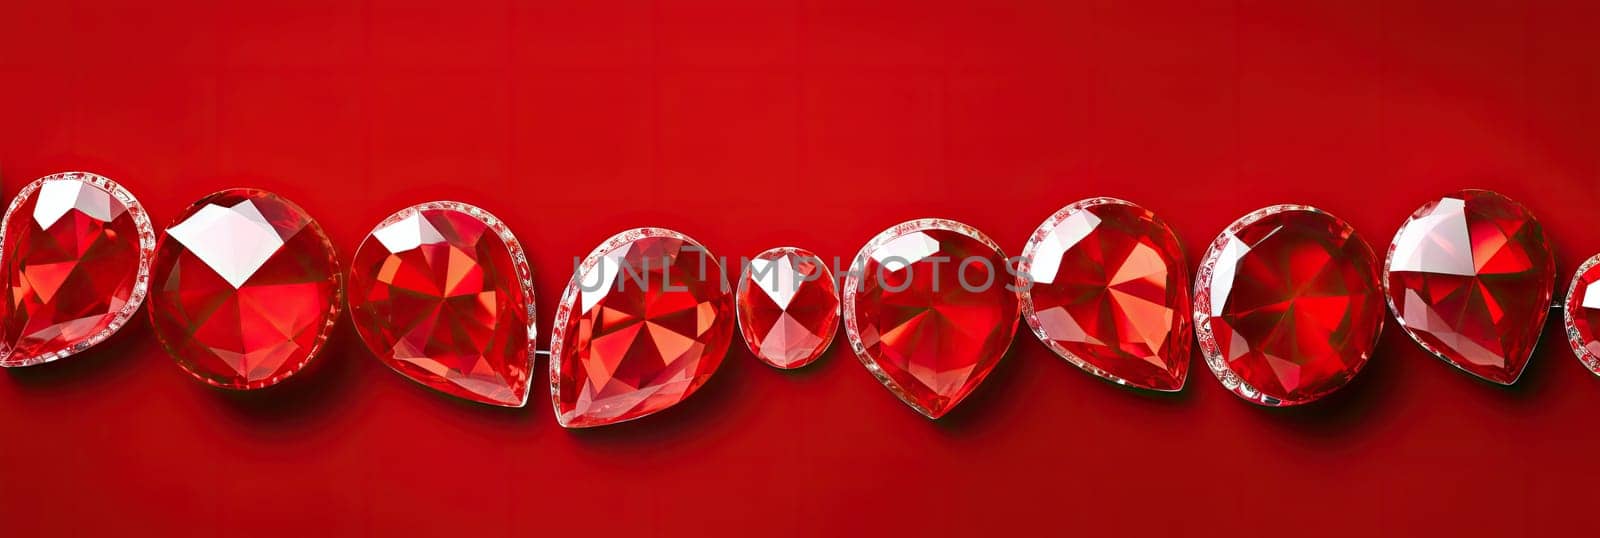 Red gemstone hearts on red background by Yurich32